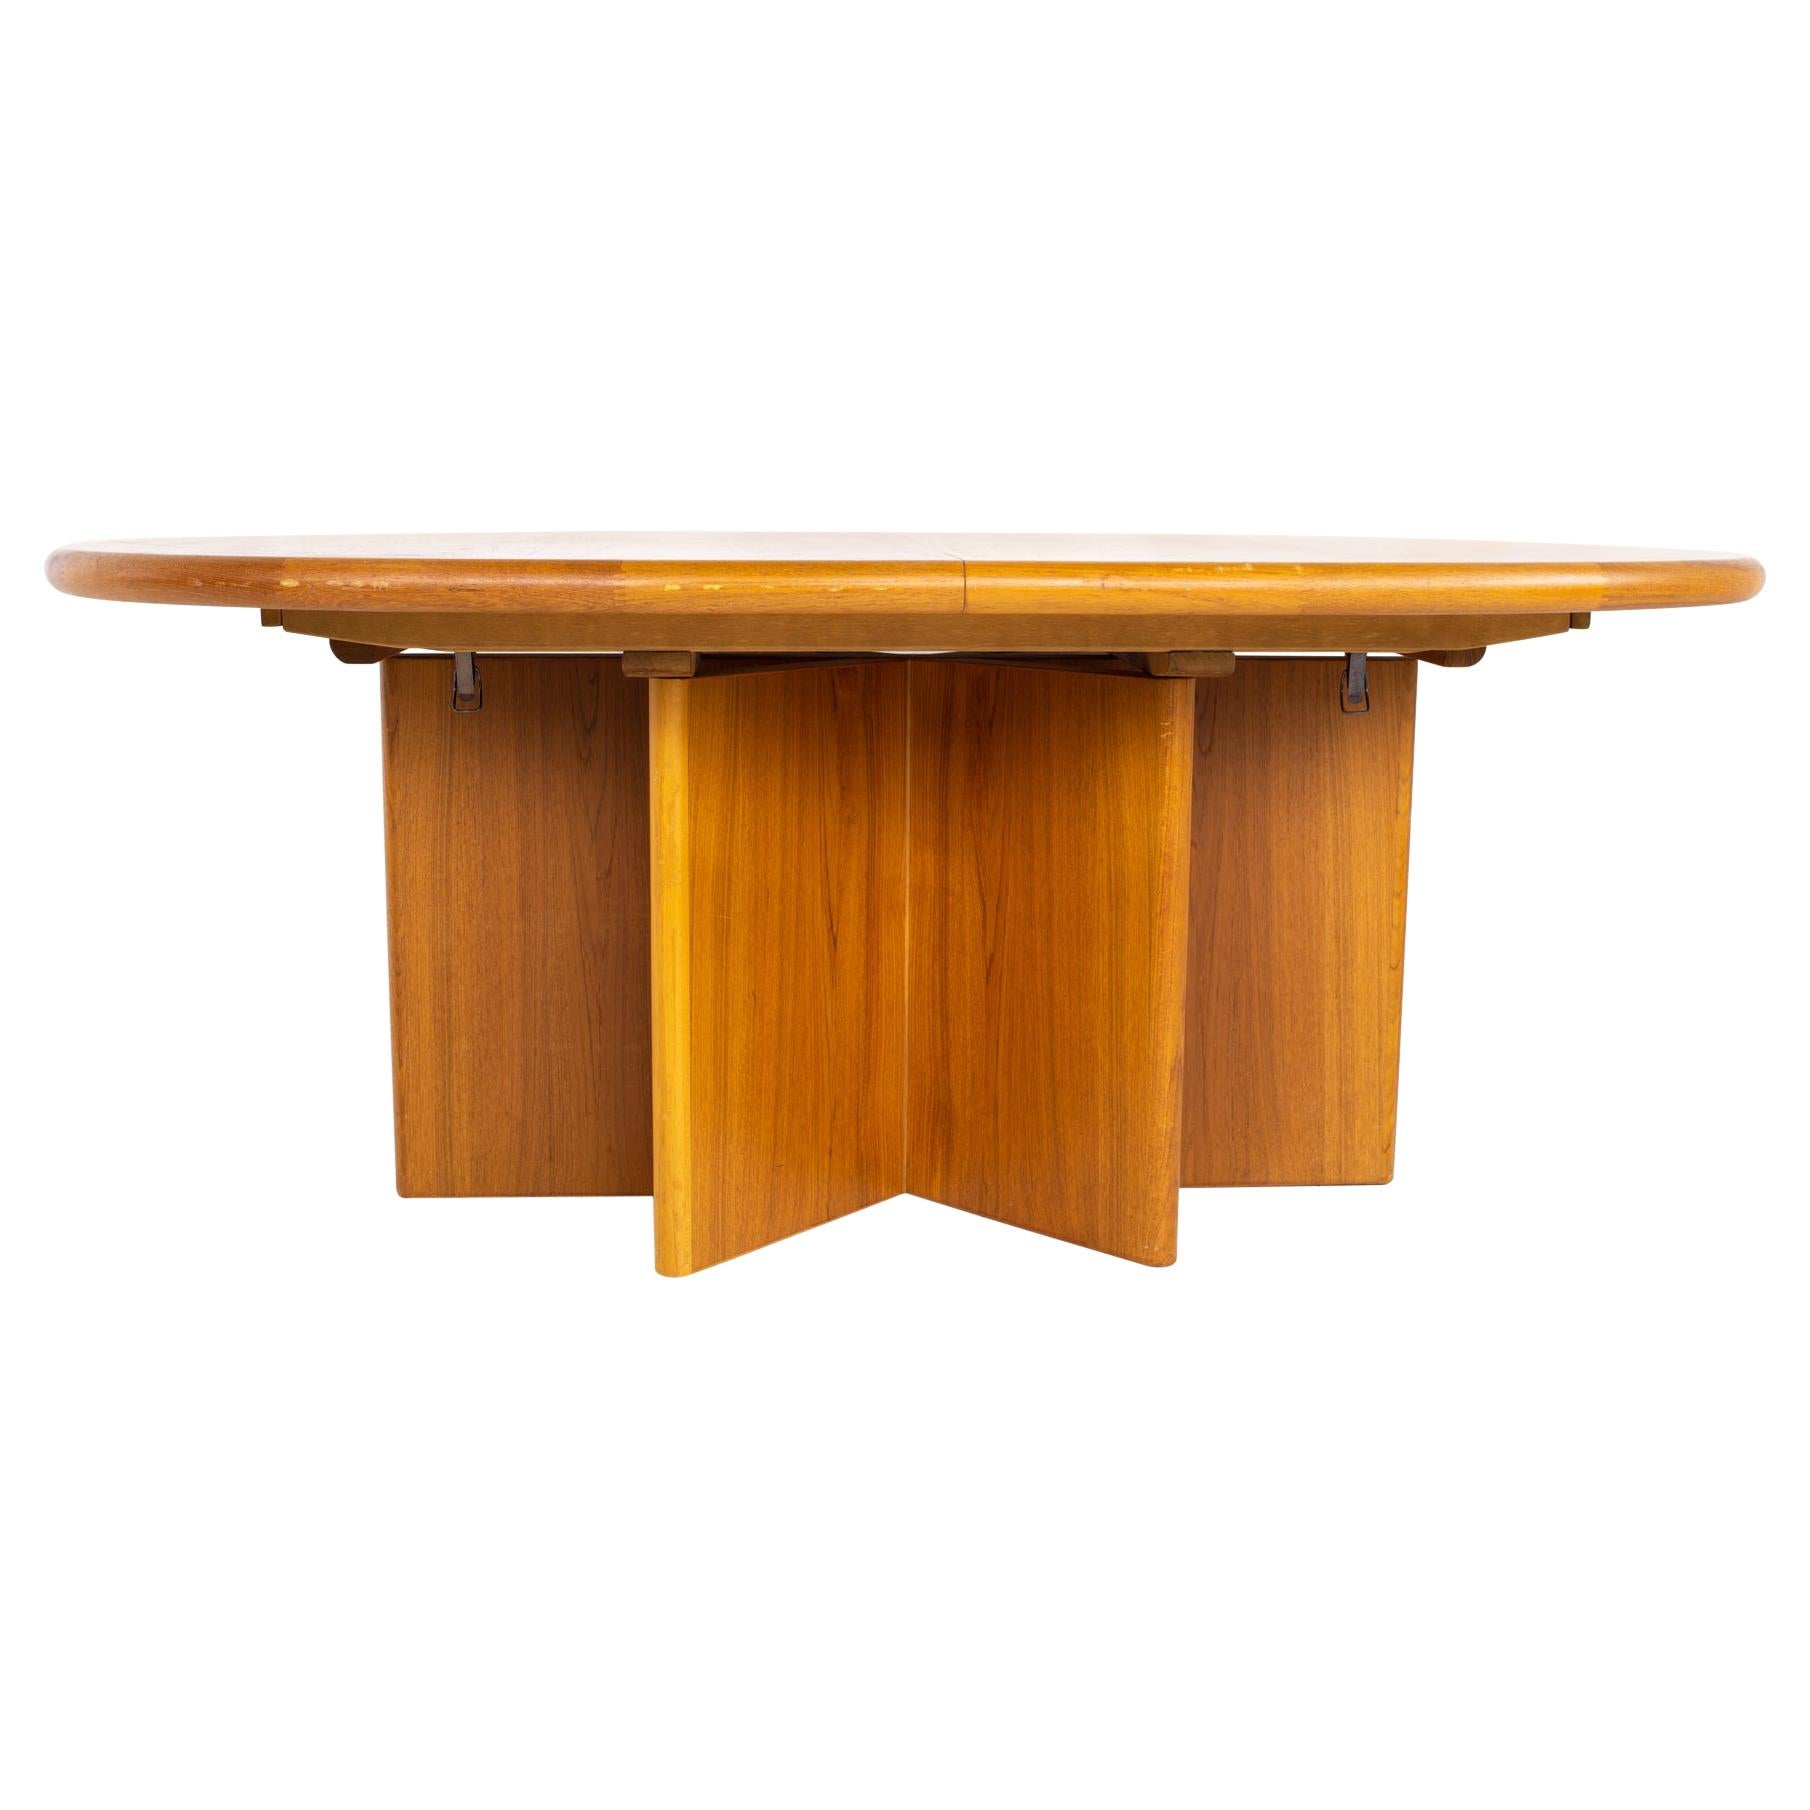 Mid century teak starburst pedestal expanding hidden leaf dining table
Table measures: 70 wide x 45 deep x 29 inches high, each leaf measures 19.5 inches wide, making a maximum table width of 109 inches wide when both leaves are used

All pieces